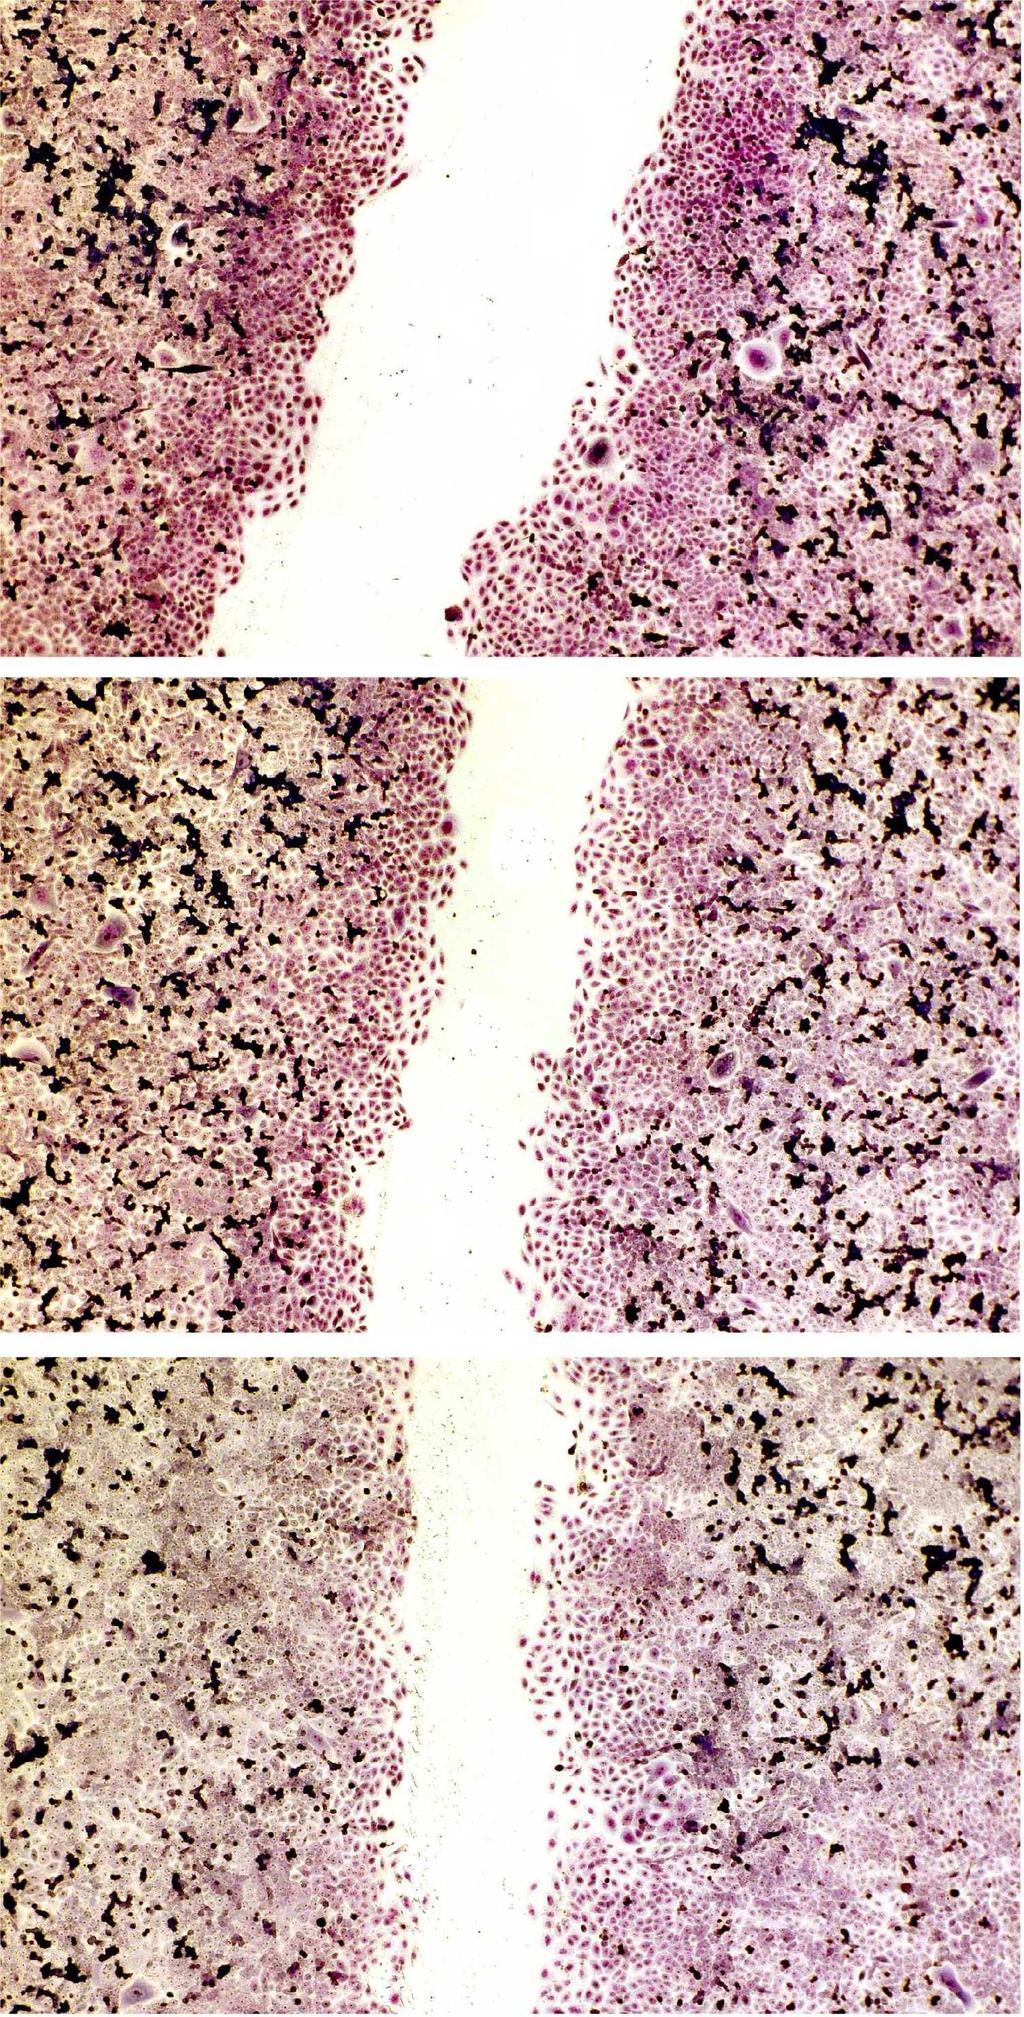 4 (5) Figure 1: Micrographs of stained cell cultures using bright field after 3 days of wound healing.